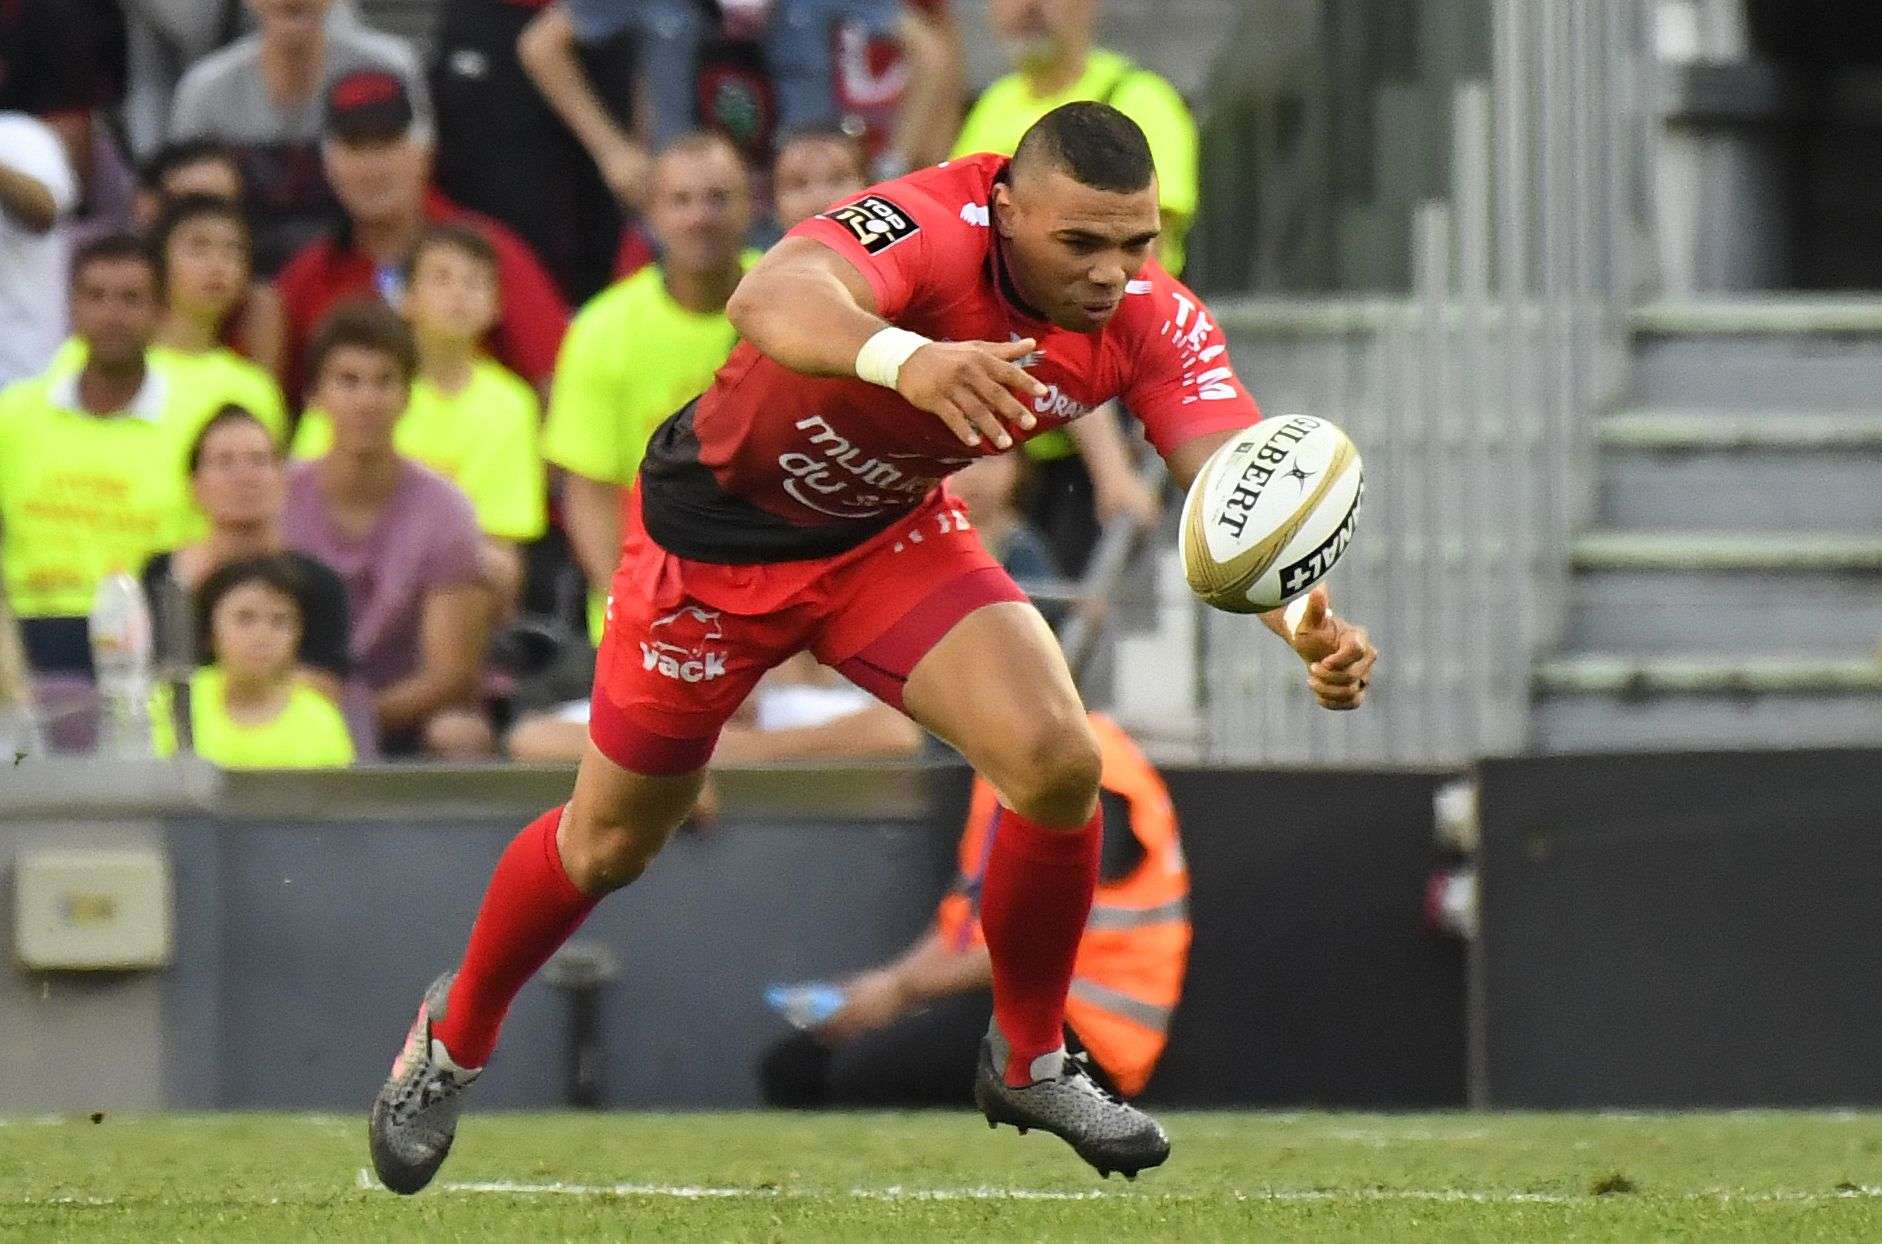 Club commitments with French giants Toulon limited the seven-a-side appearances Bryan Habana could make for South Africa. Photo: AFP